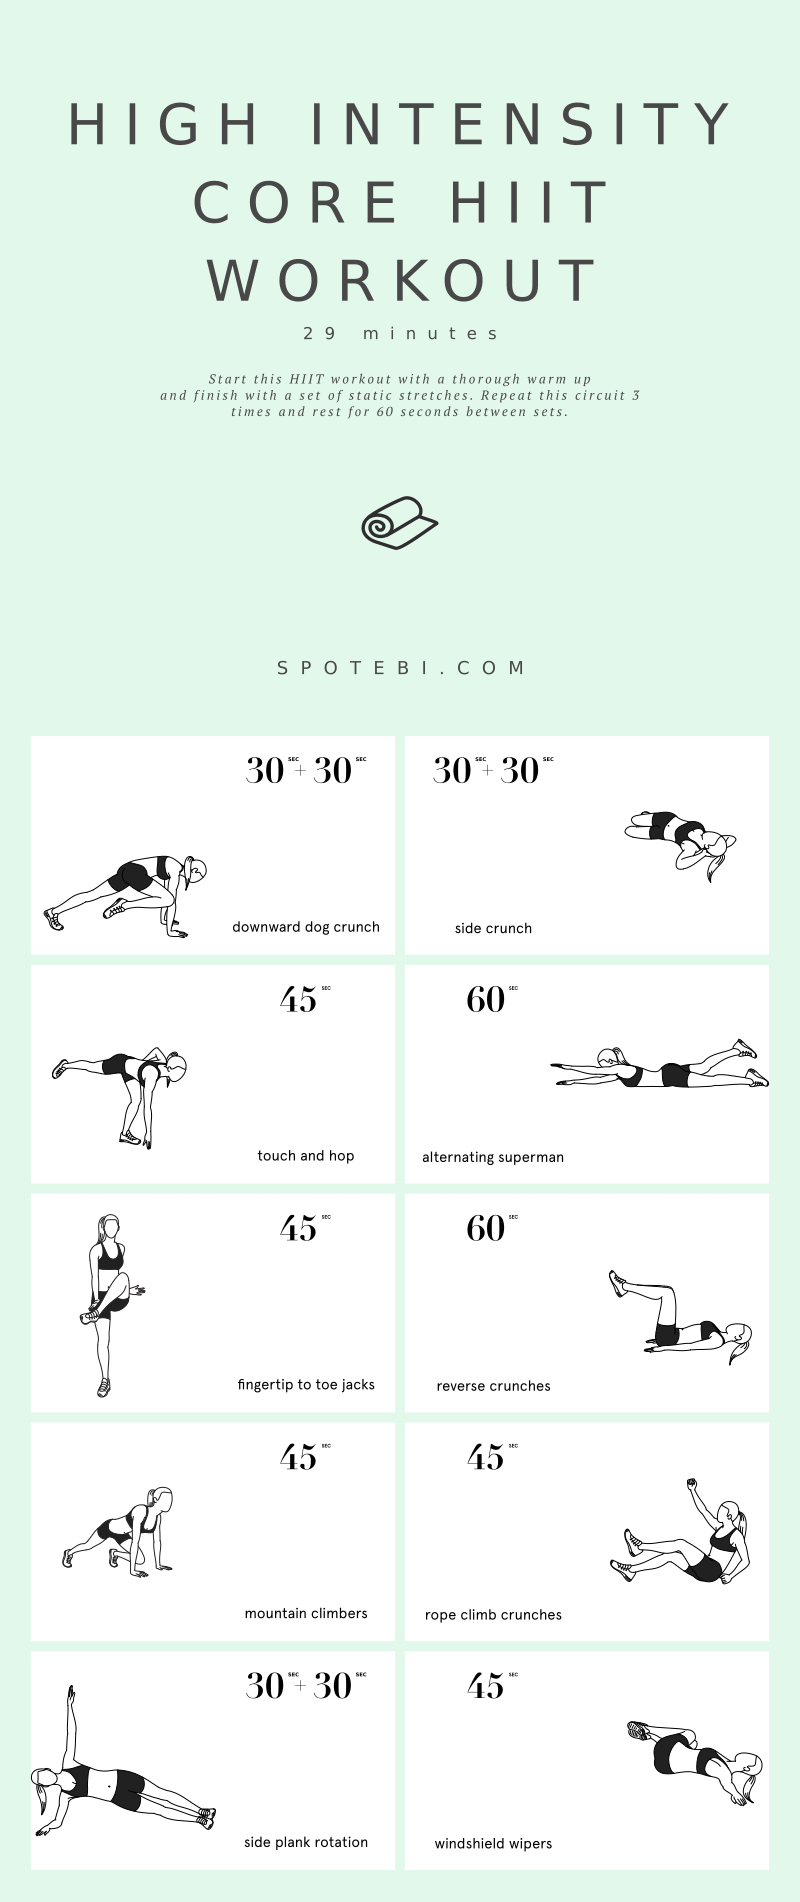 Sculpt, tone, and tighten your whole core at home with this high-intensity workout for women. Improve your cardiovascular endurance, speed up your metabolism, and blast belly fat in less than 30 minutes! https://www.spotebi.com/workout-routines/high-intensity-core-workout/